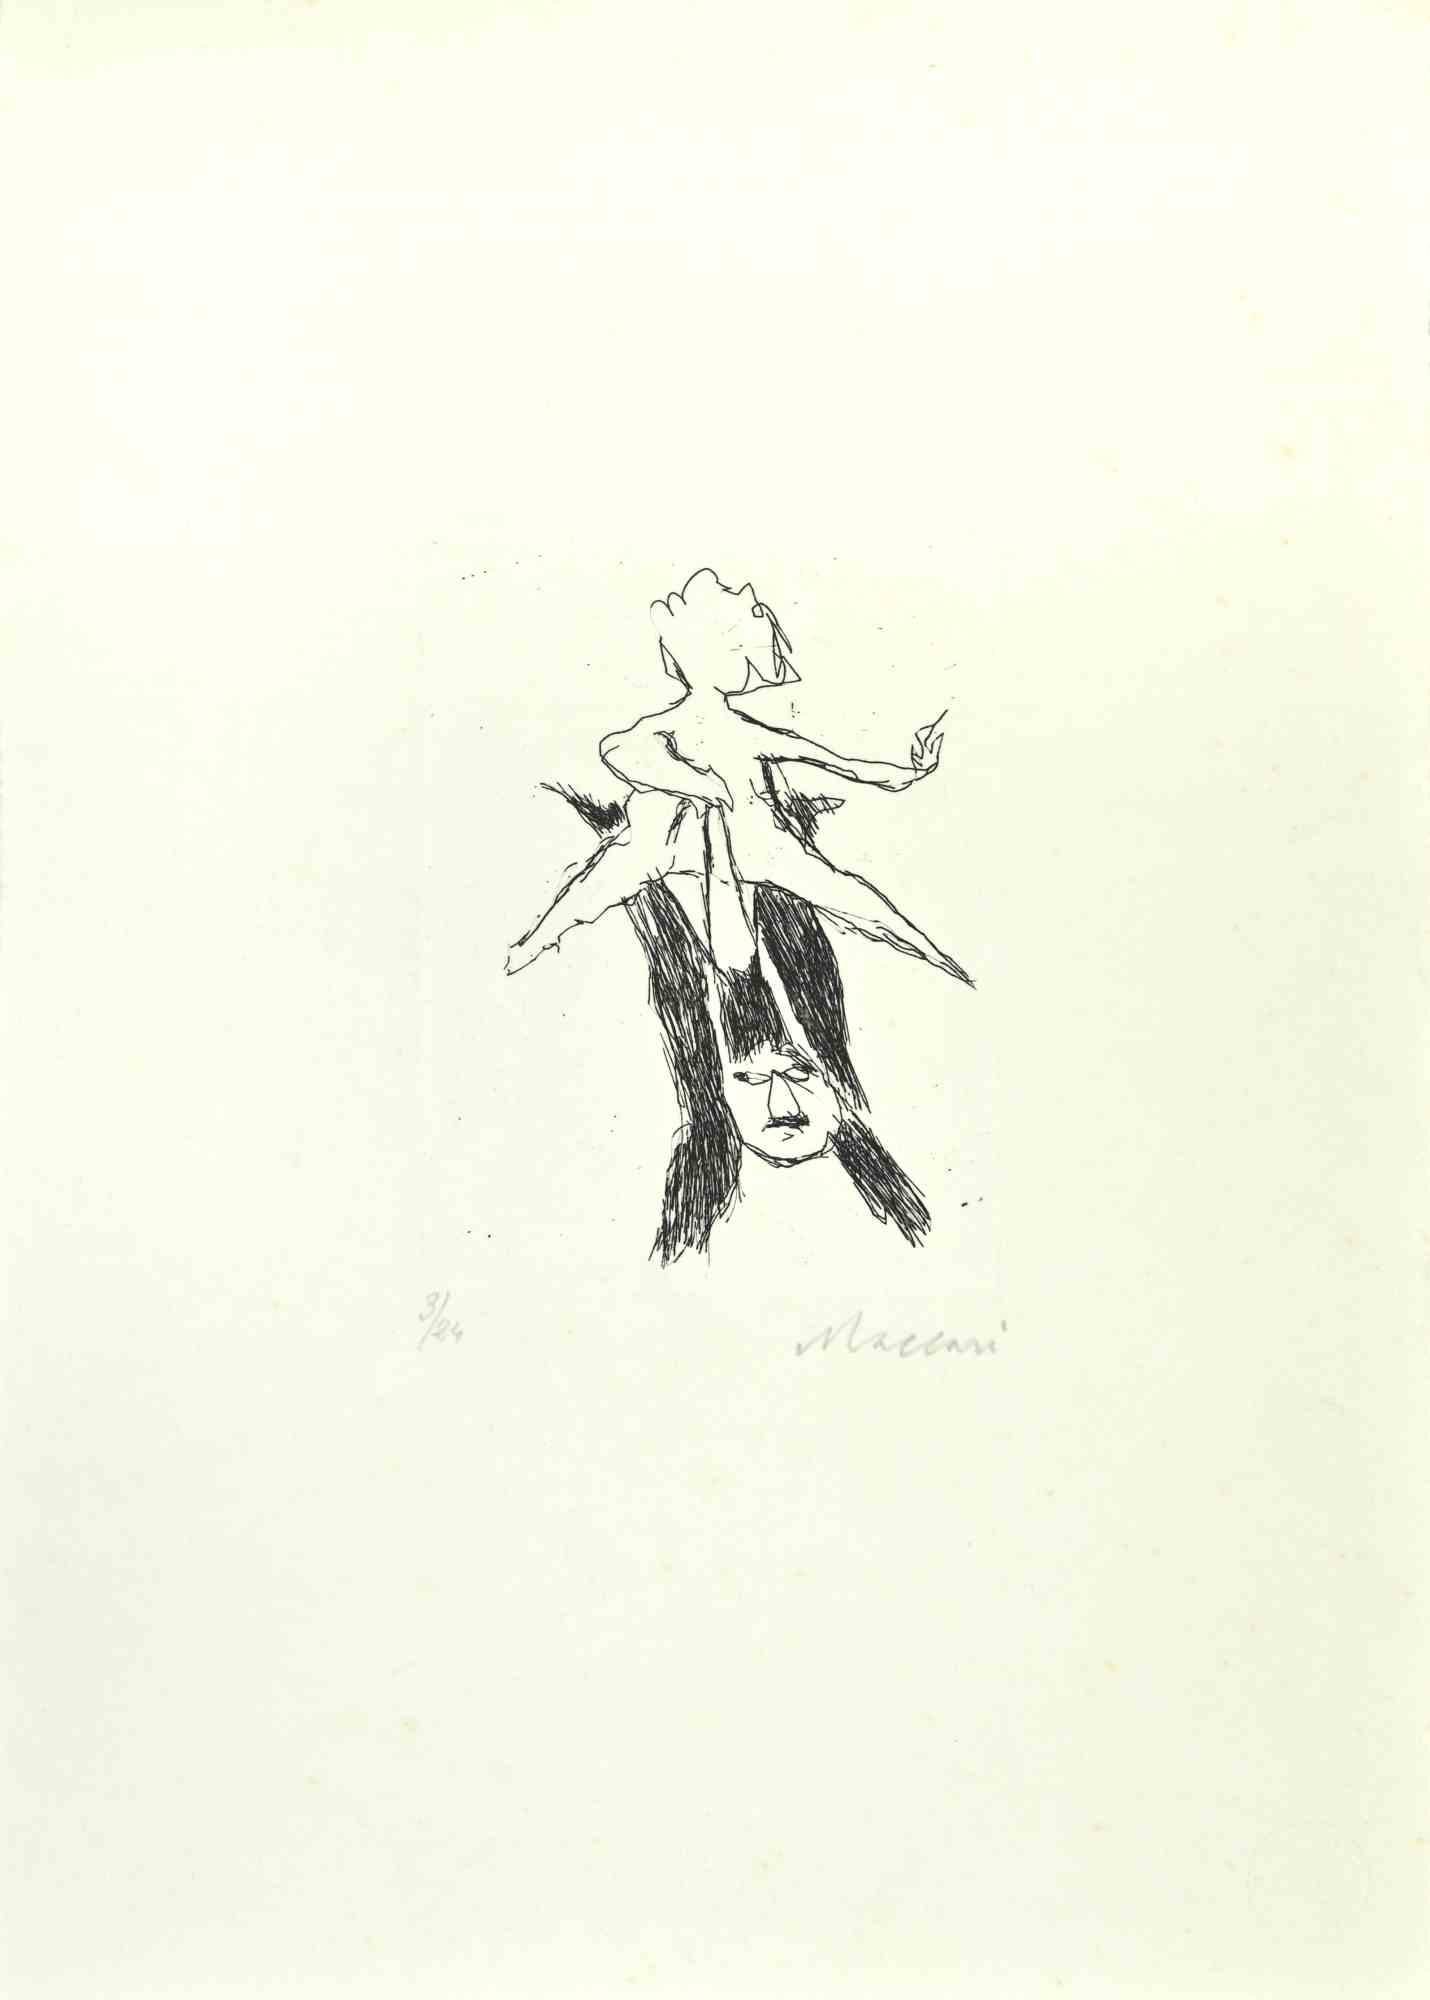 The Dance  is an Etching and Drypoint realized by Mino Maccari in the Mid-20th Century.

Hand-signed in the lower right part.

Numbered. Edition,3/24.

Good conditions.

 

Mino Maccari (Siena, 1924-Rome, June 16, 1989) was an Italian writer,